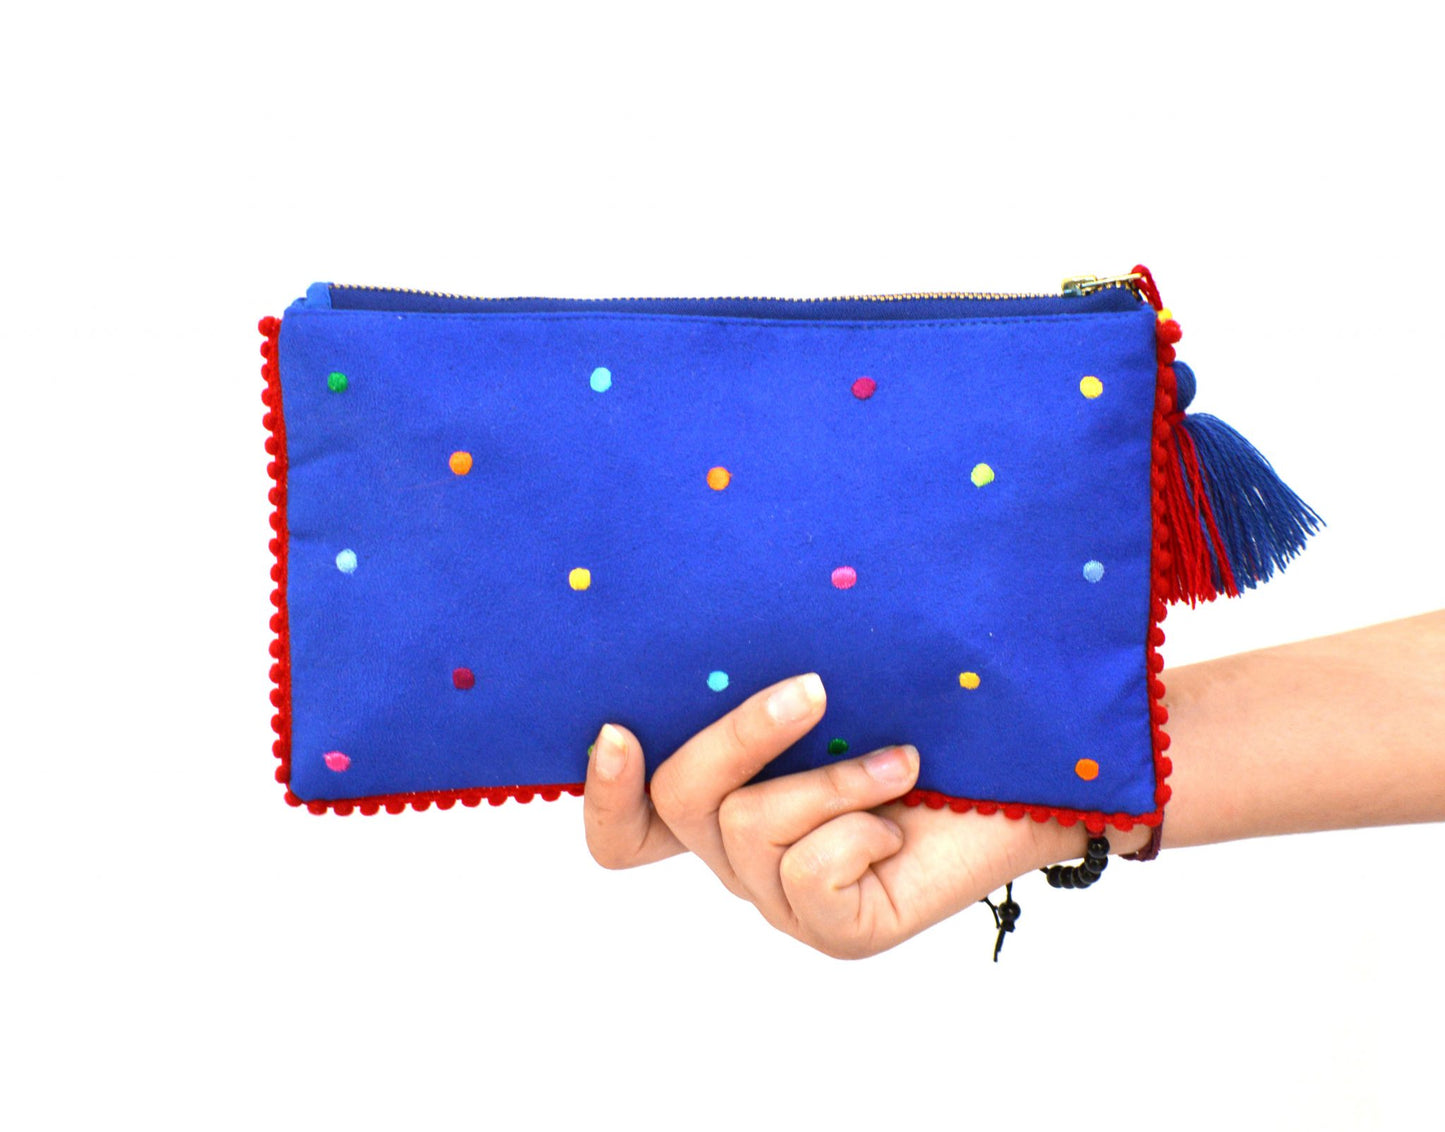 Truck art - Blue and red embroidered pouch, 5X9 inches